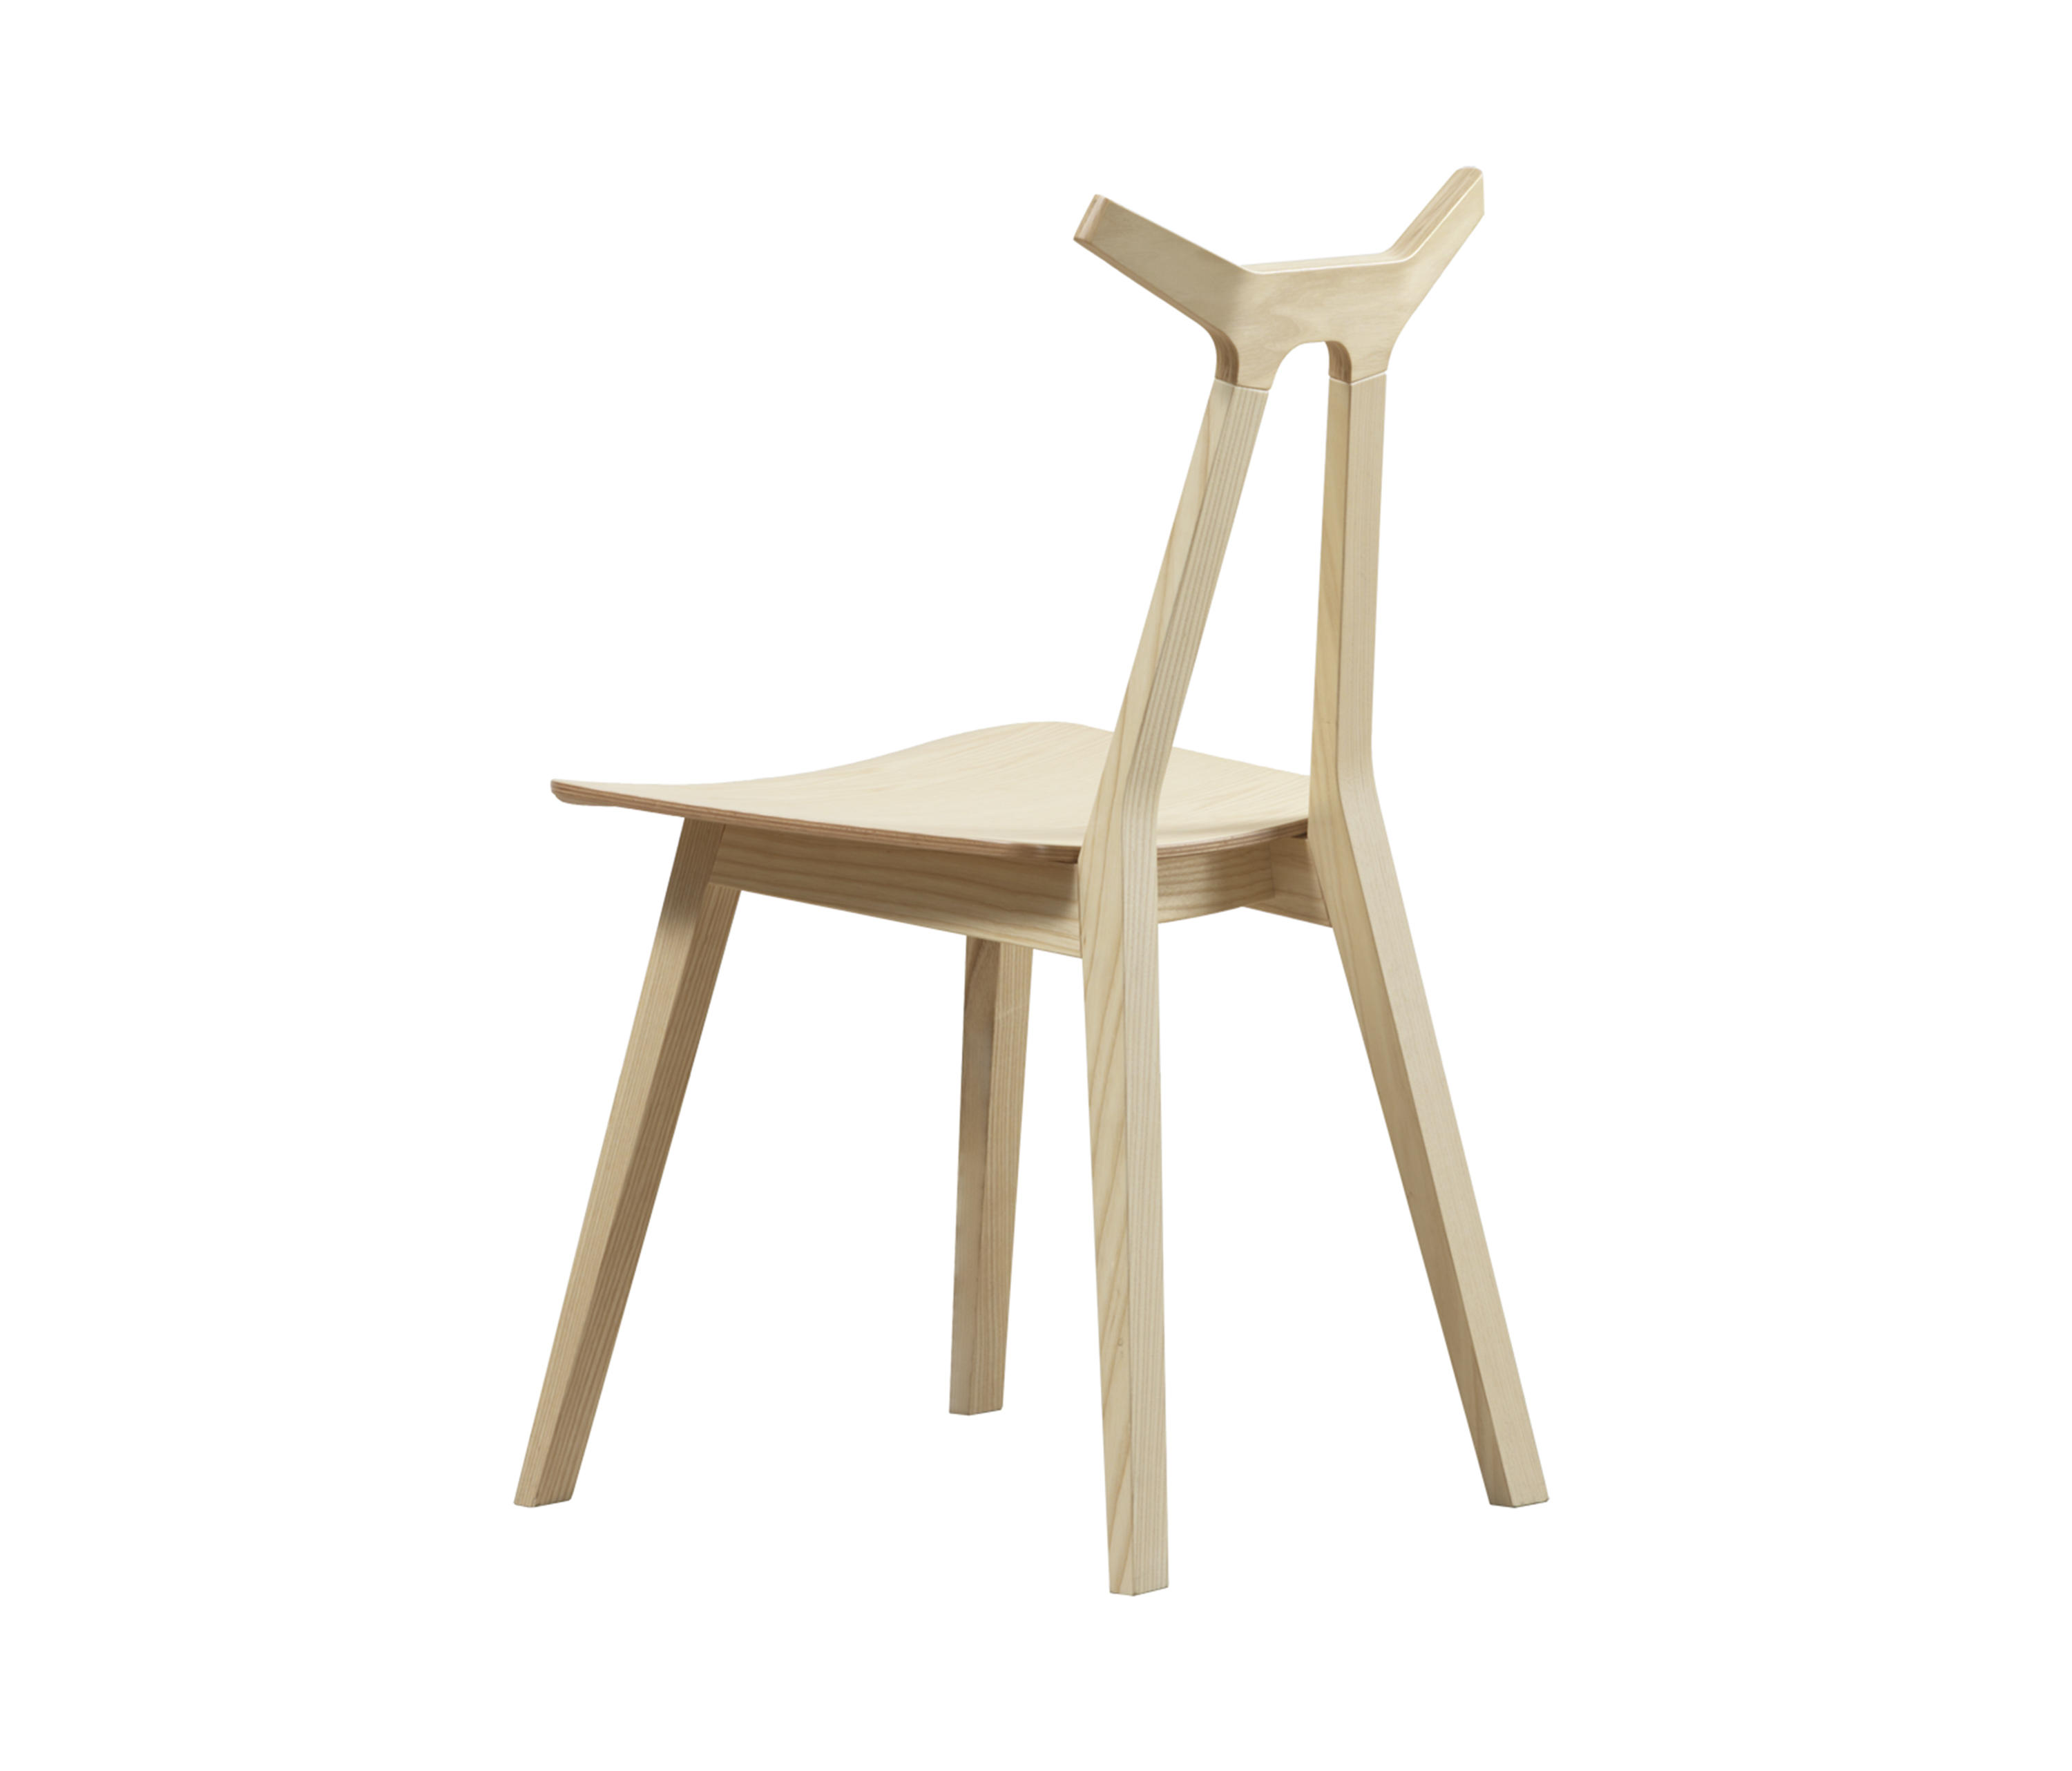 NARA CHAIR - Restaurant chairs from Fredericia Furniture | Architonic